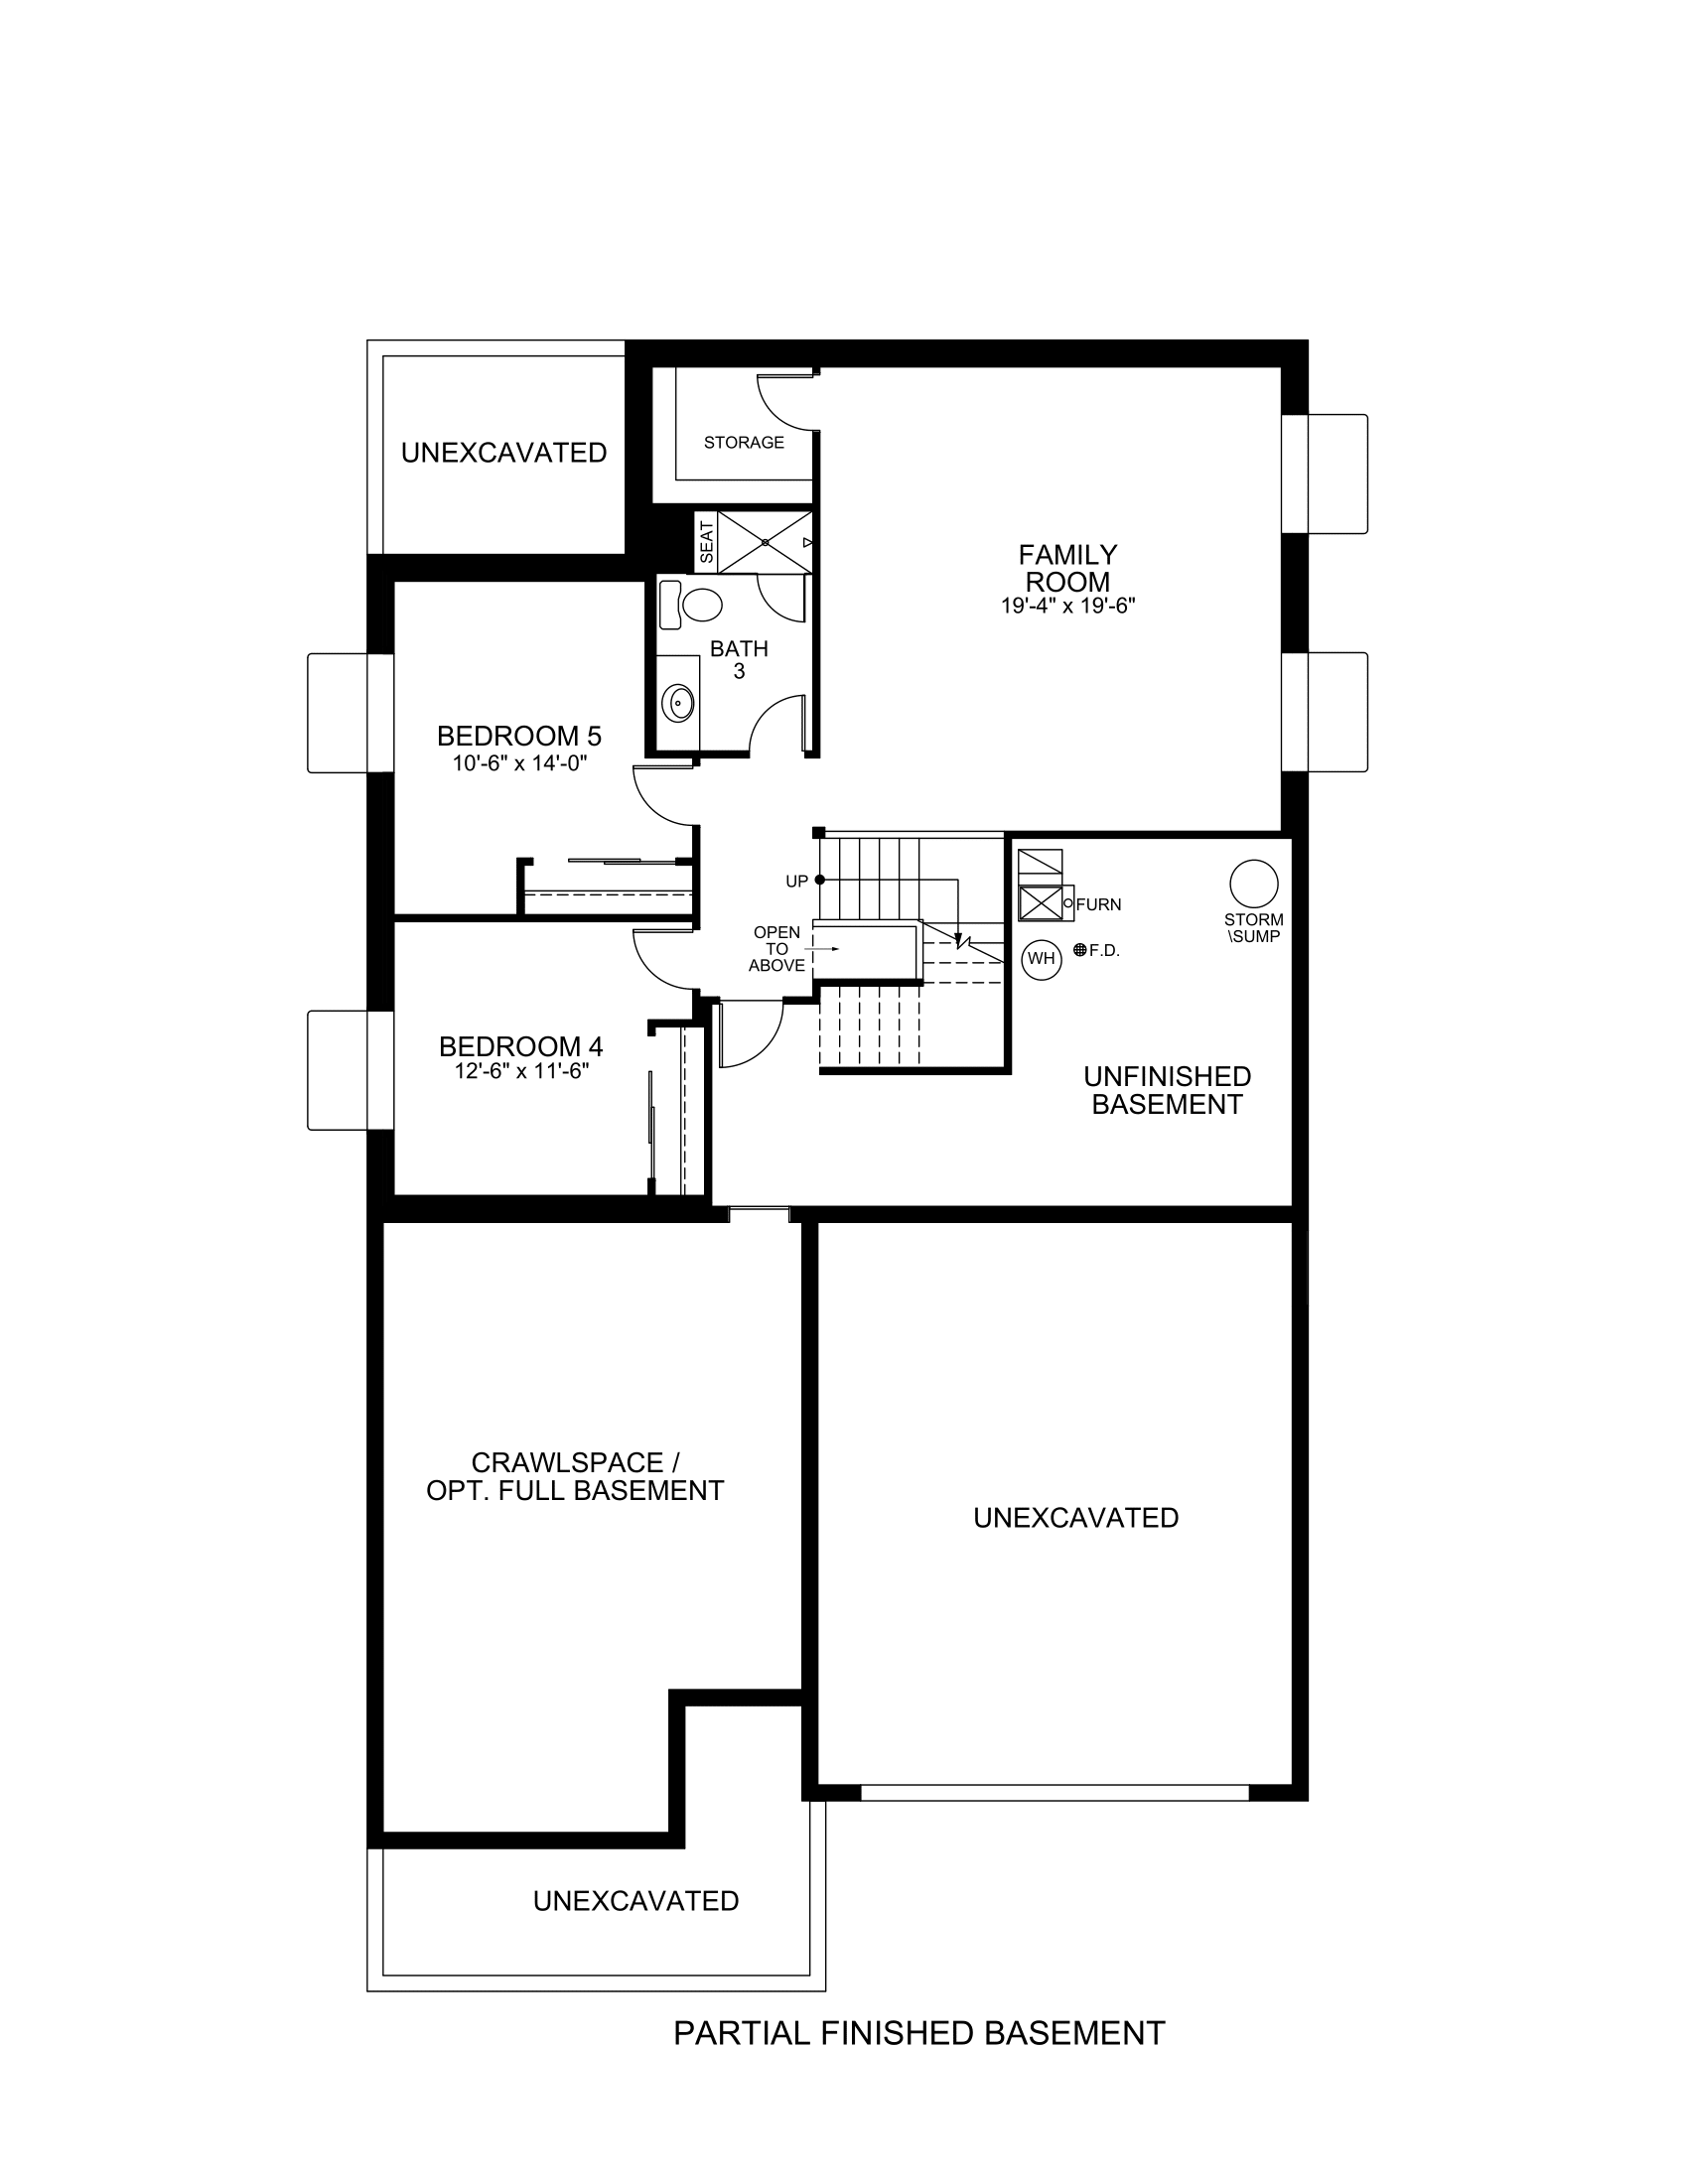 Partial Finished Basement